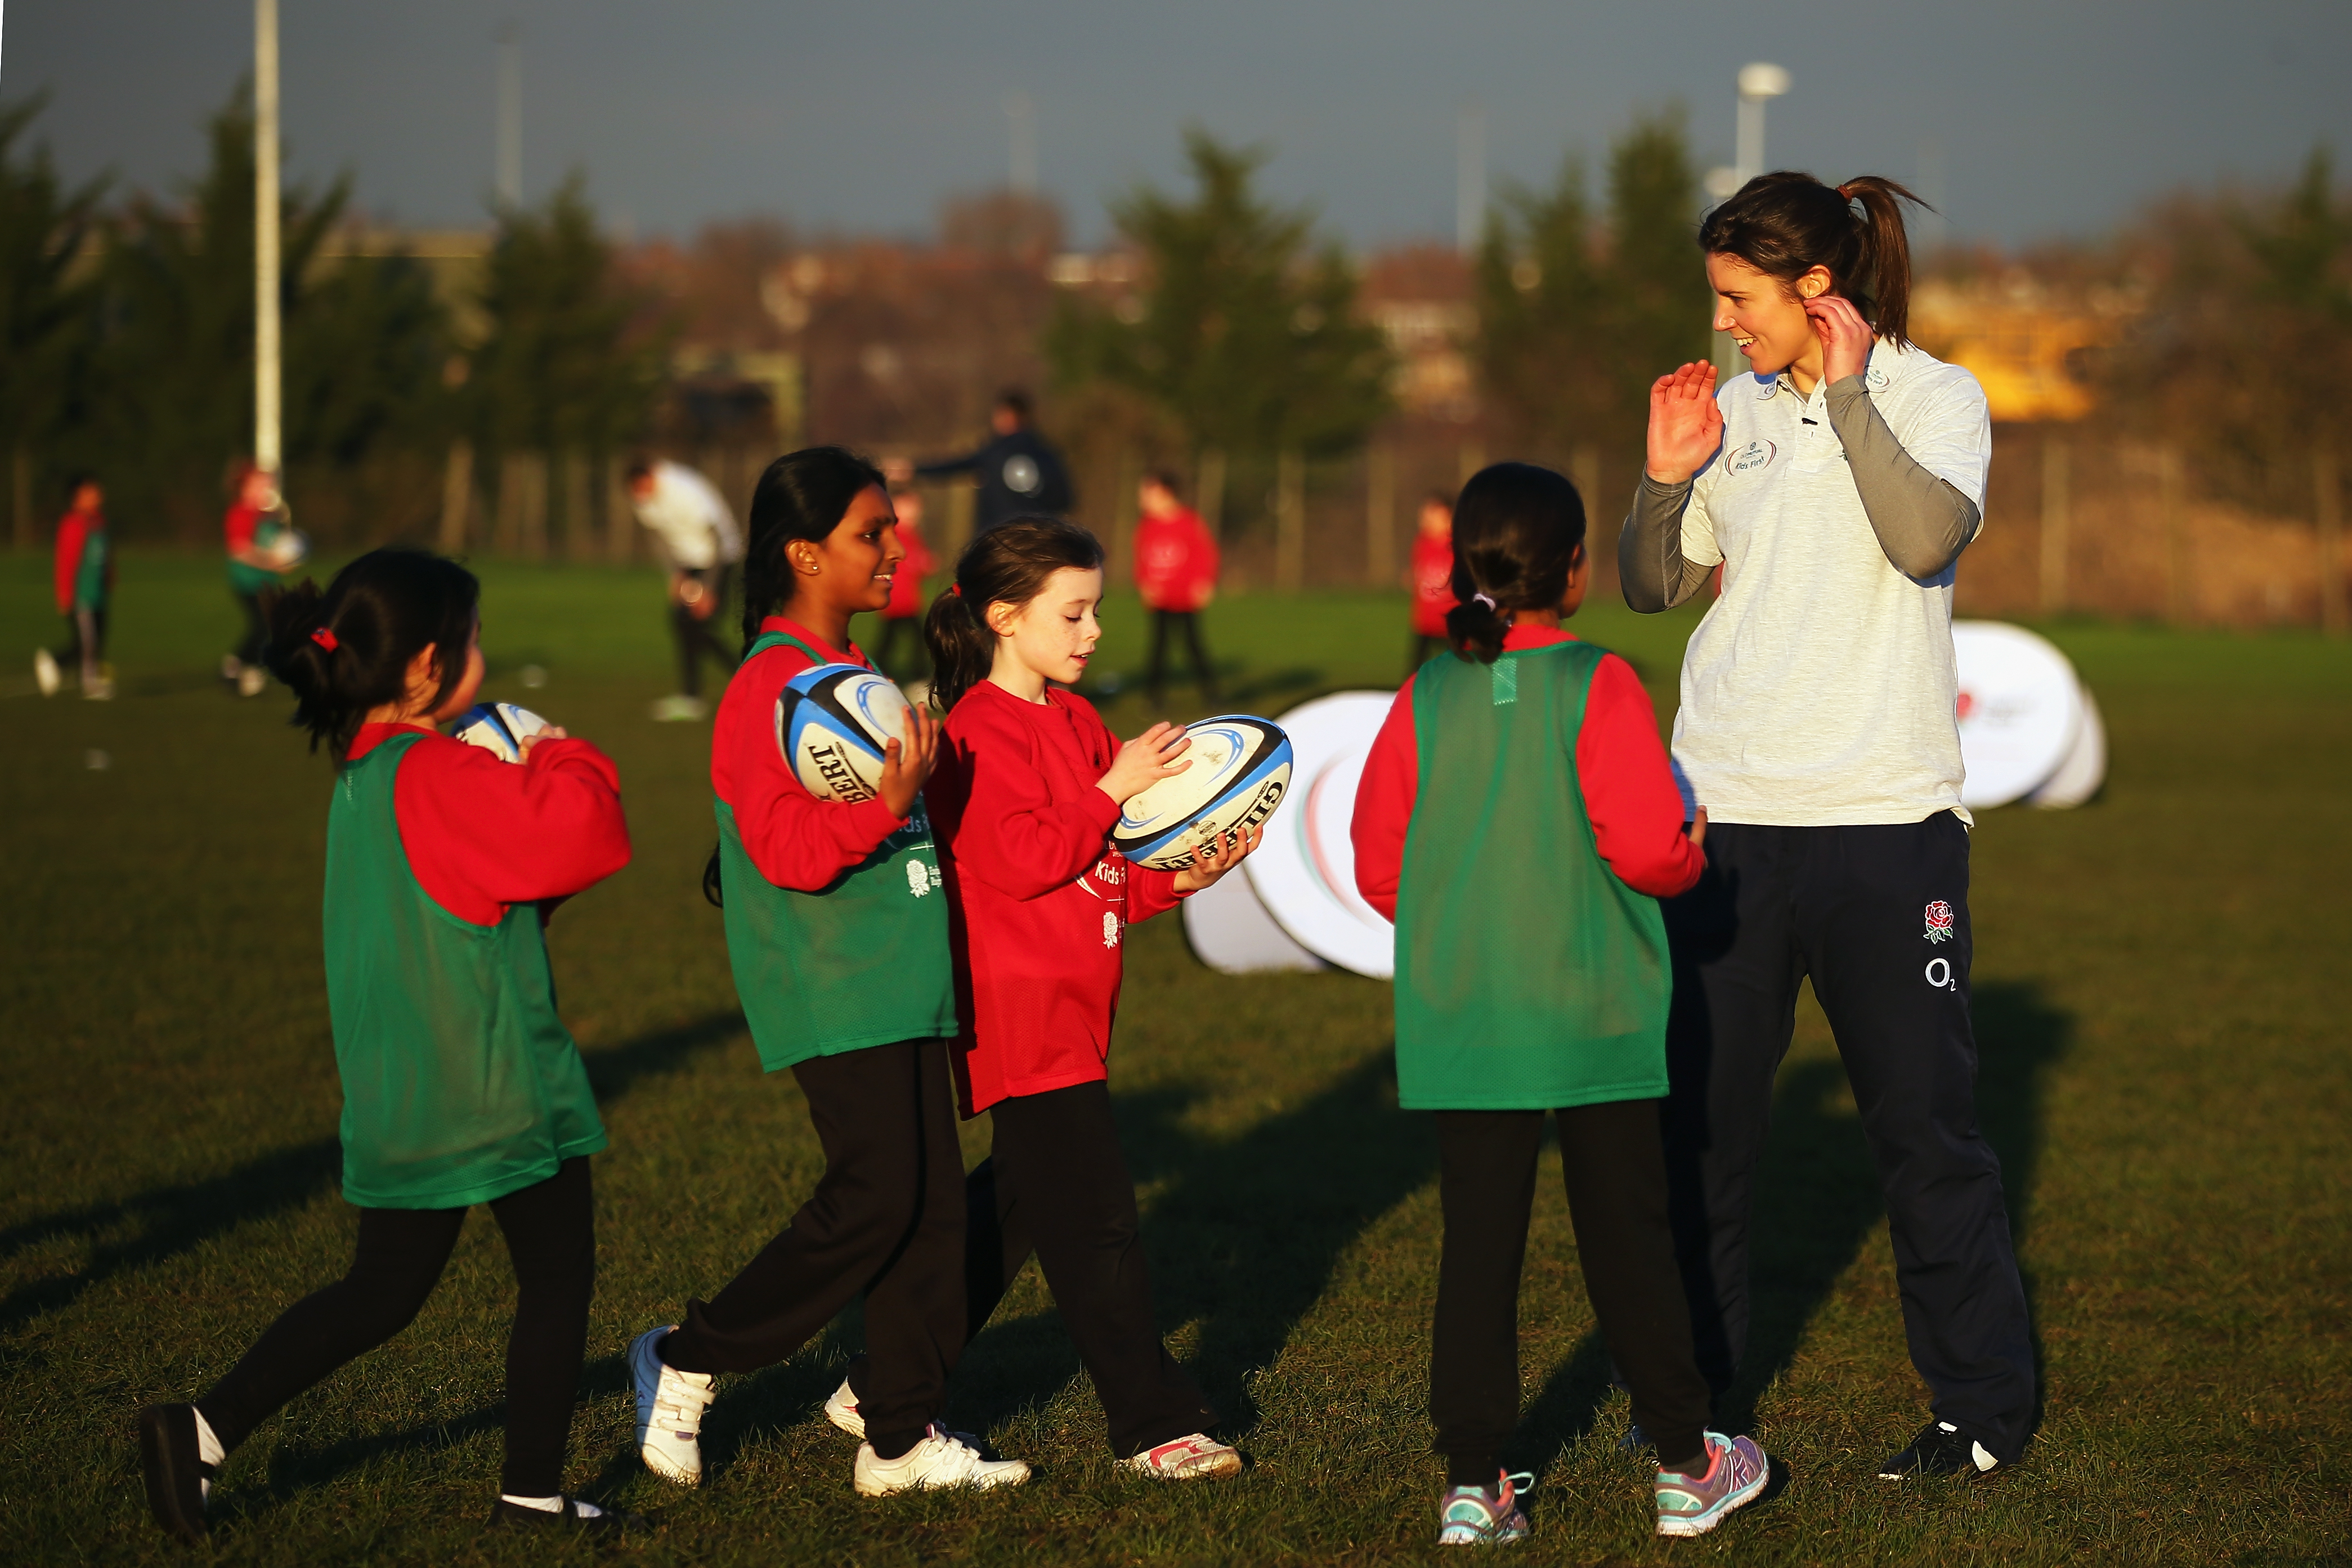 Children taking part in a rugby training session